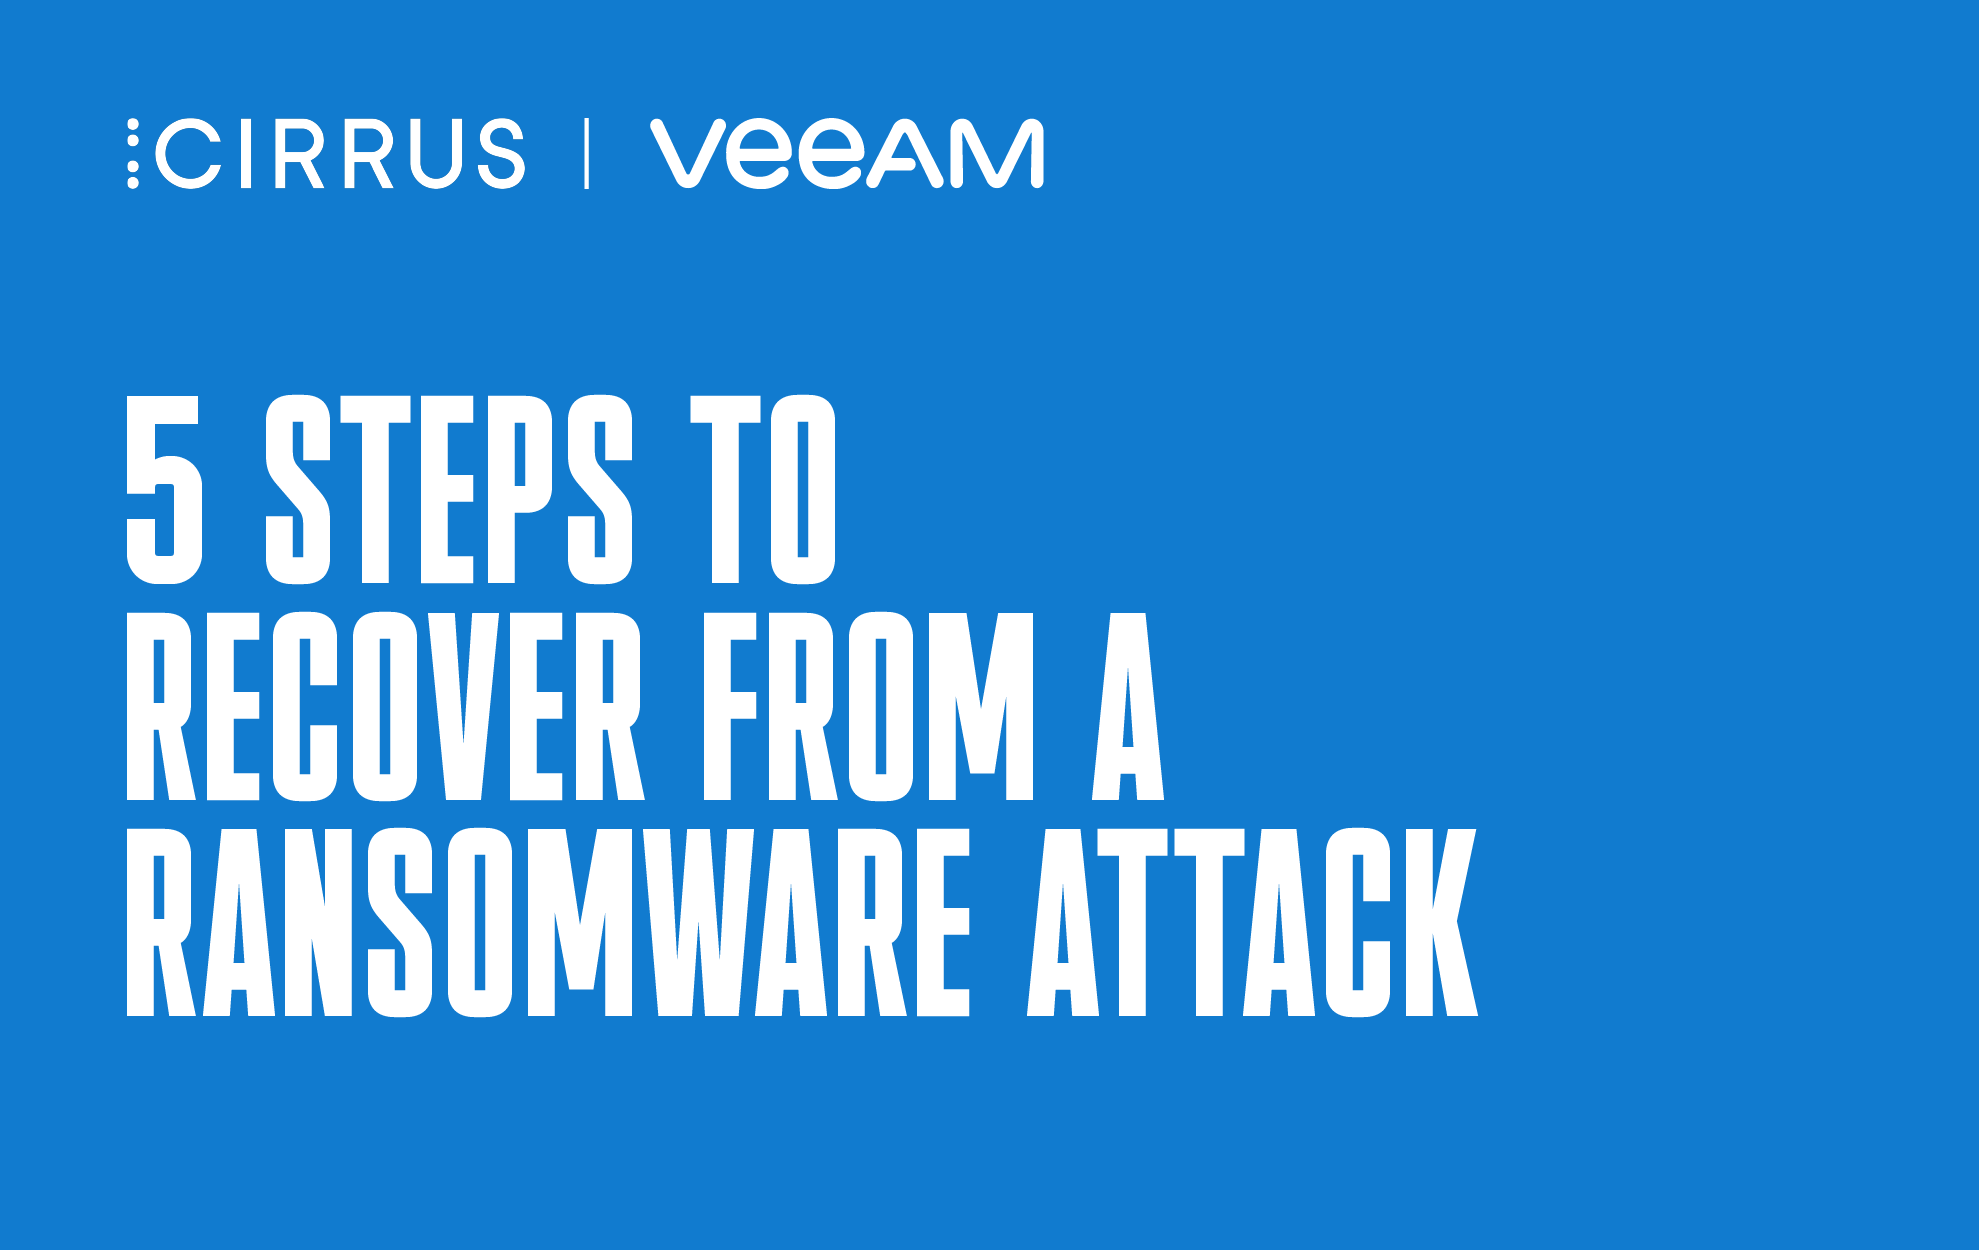 Cirrus Backup | Veeam | 5 steps to recover from a ransomware attack